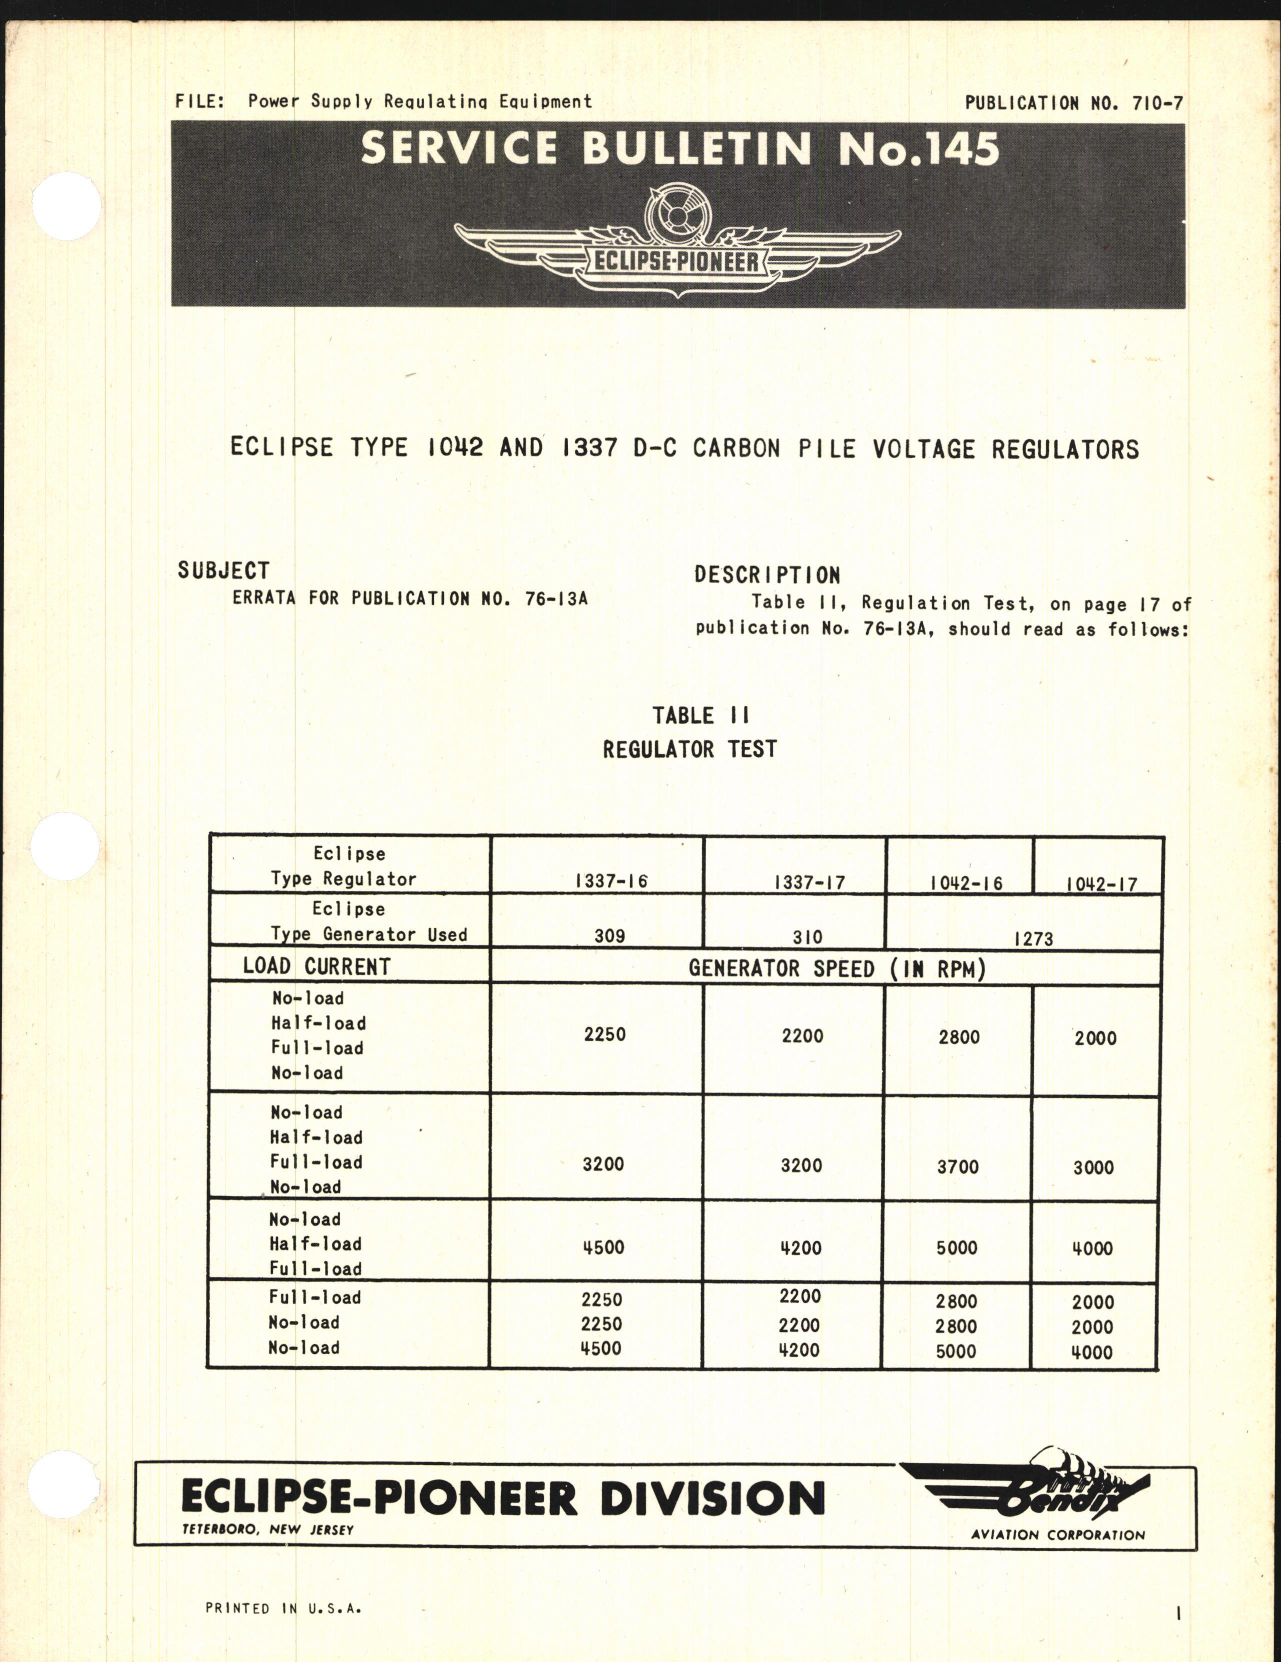 Sample page 1 from AirCorps Library document: Eclipse Type 1042 and 1337 D-C Carbon Pile Voltage Regulators